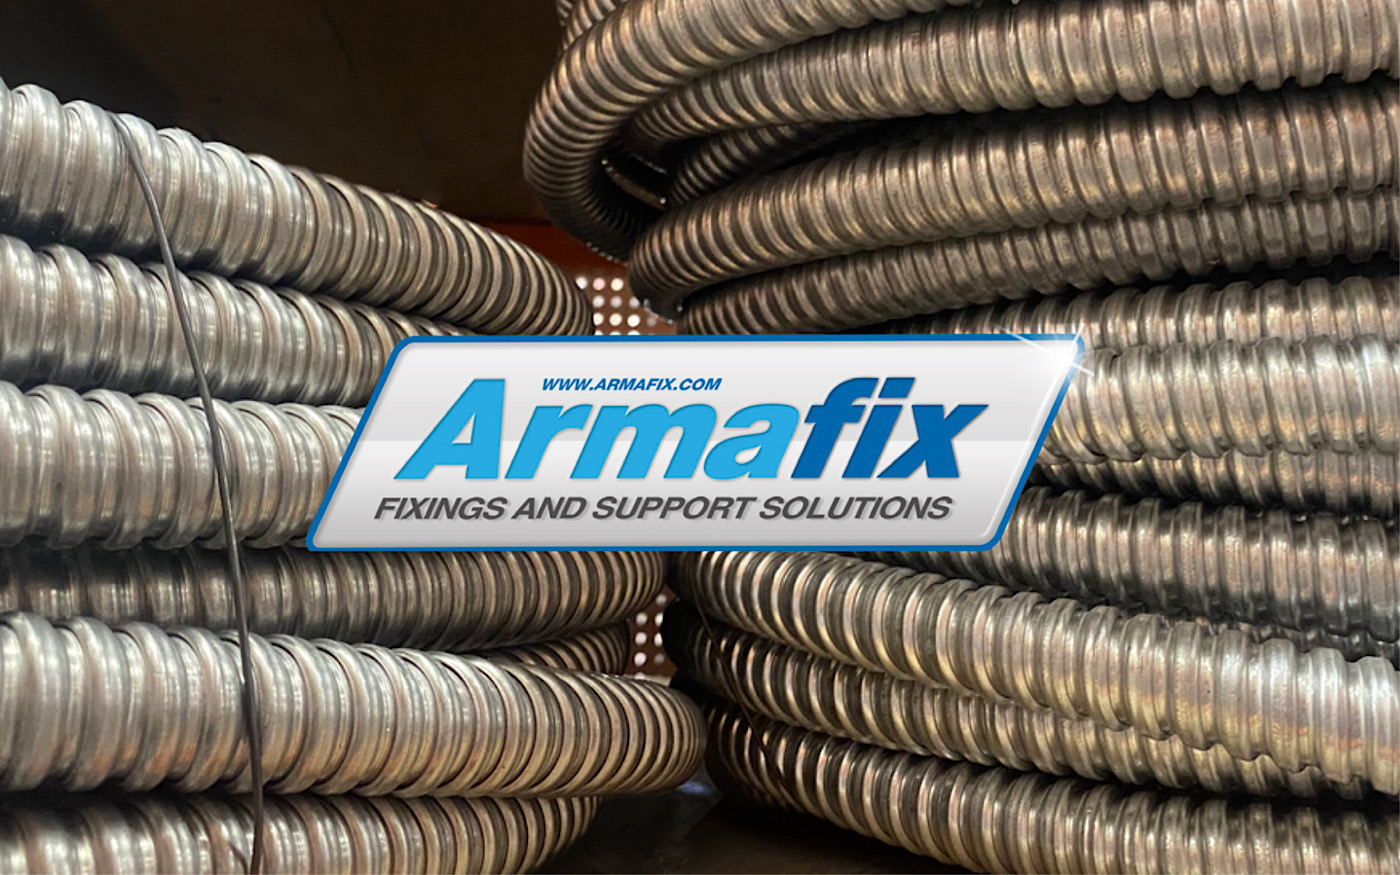 Electrical Conduits: A Free Armafix Buyer’s Guide